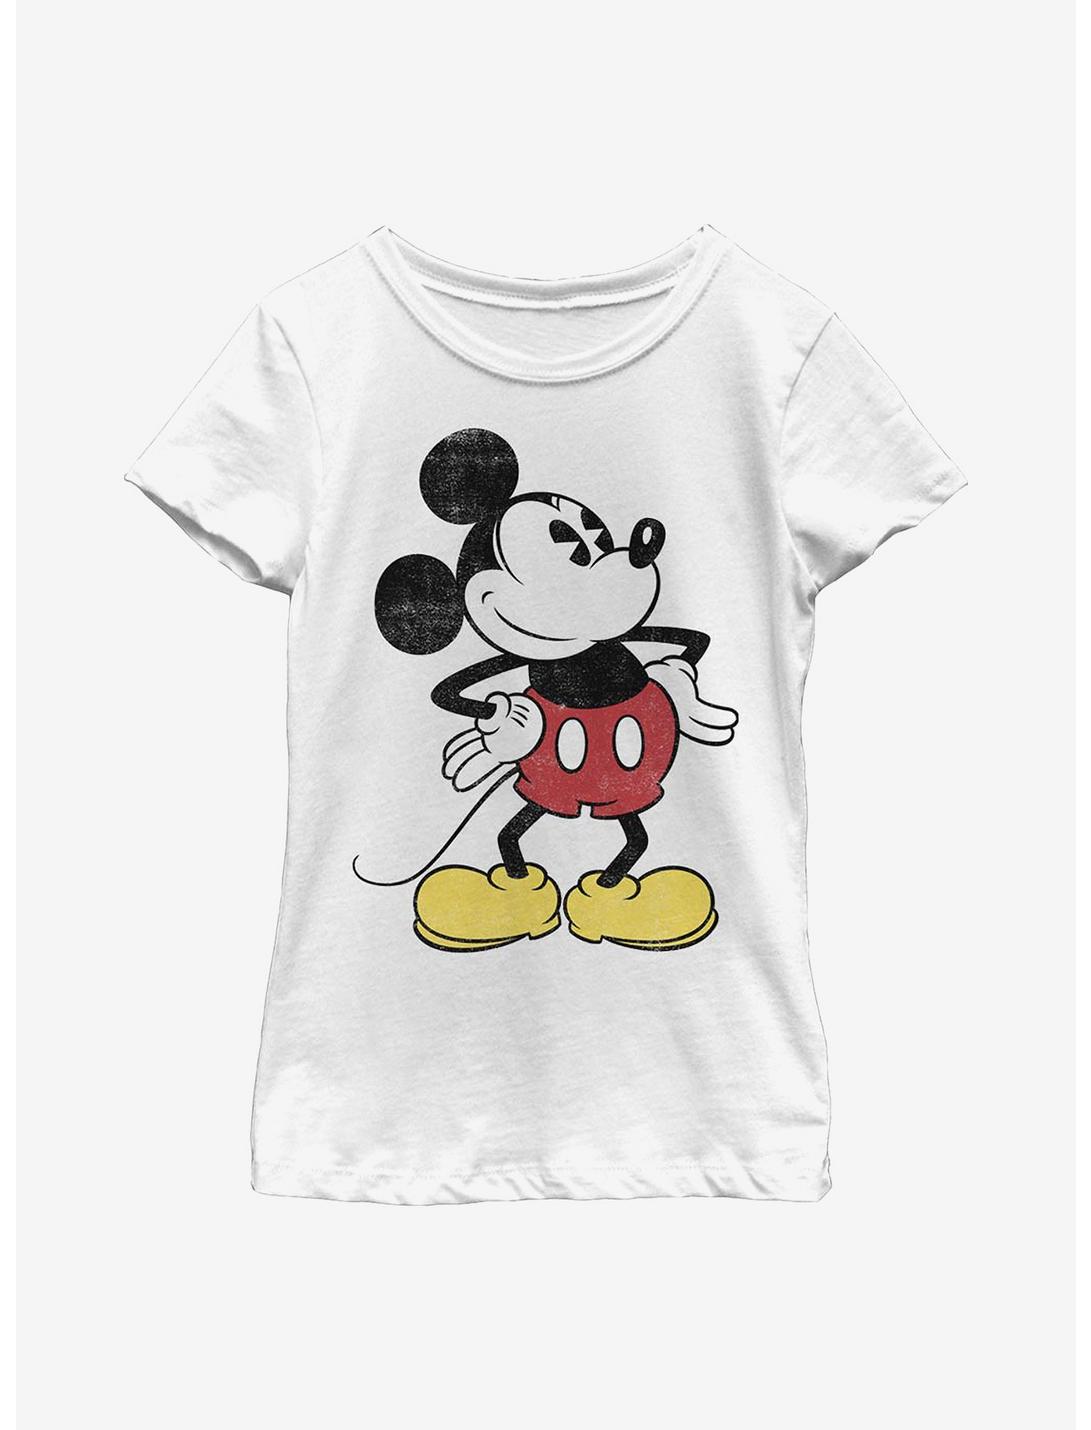 Disney Mickey Mouse Classic Vintage Mickey Youth Girls T-Shirt, WHITE, hi-res